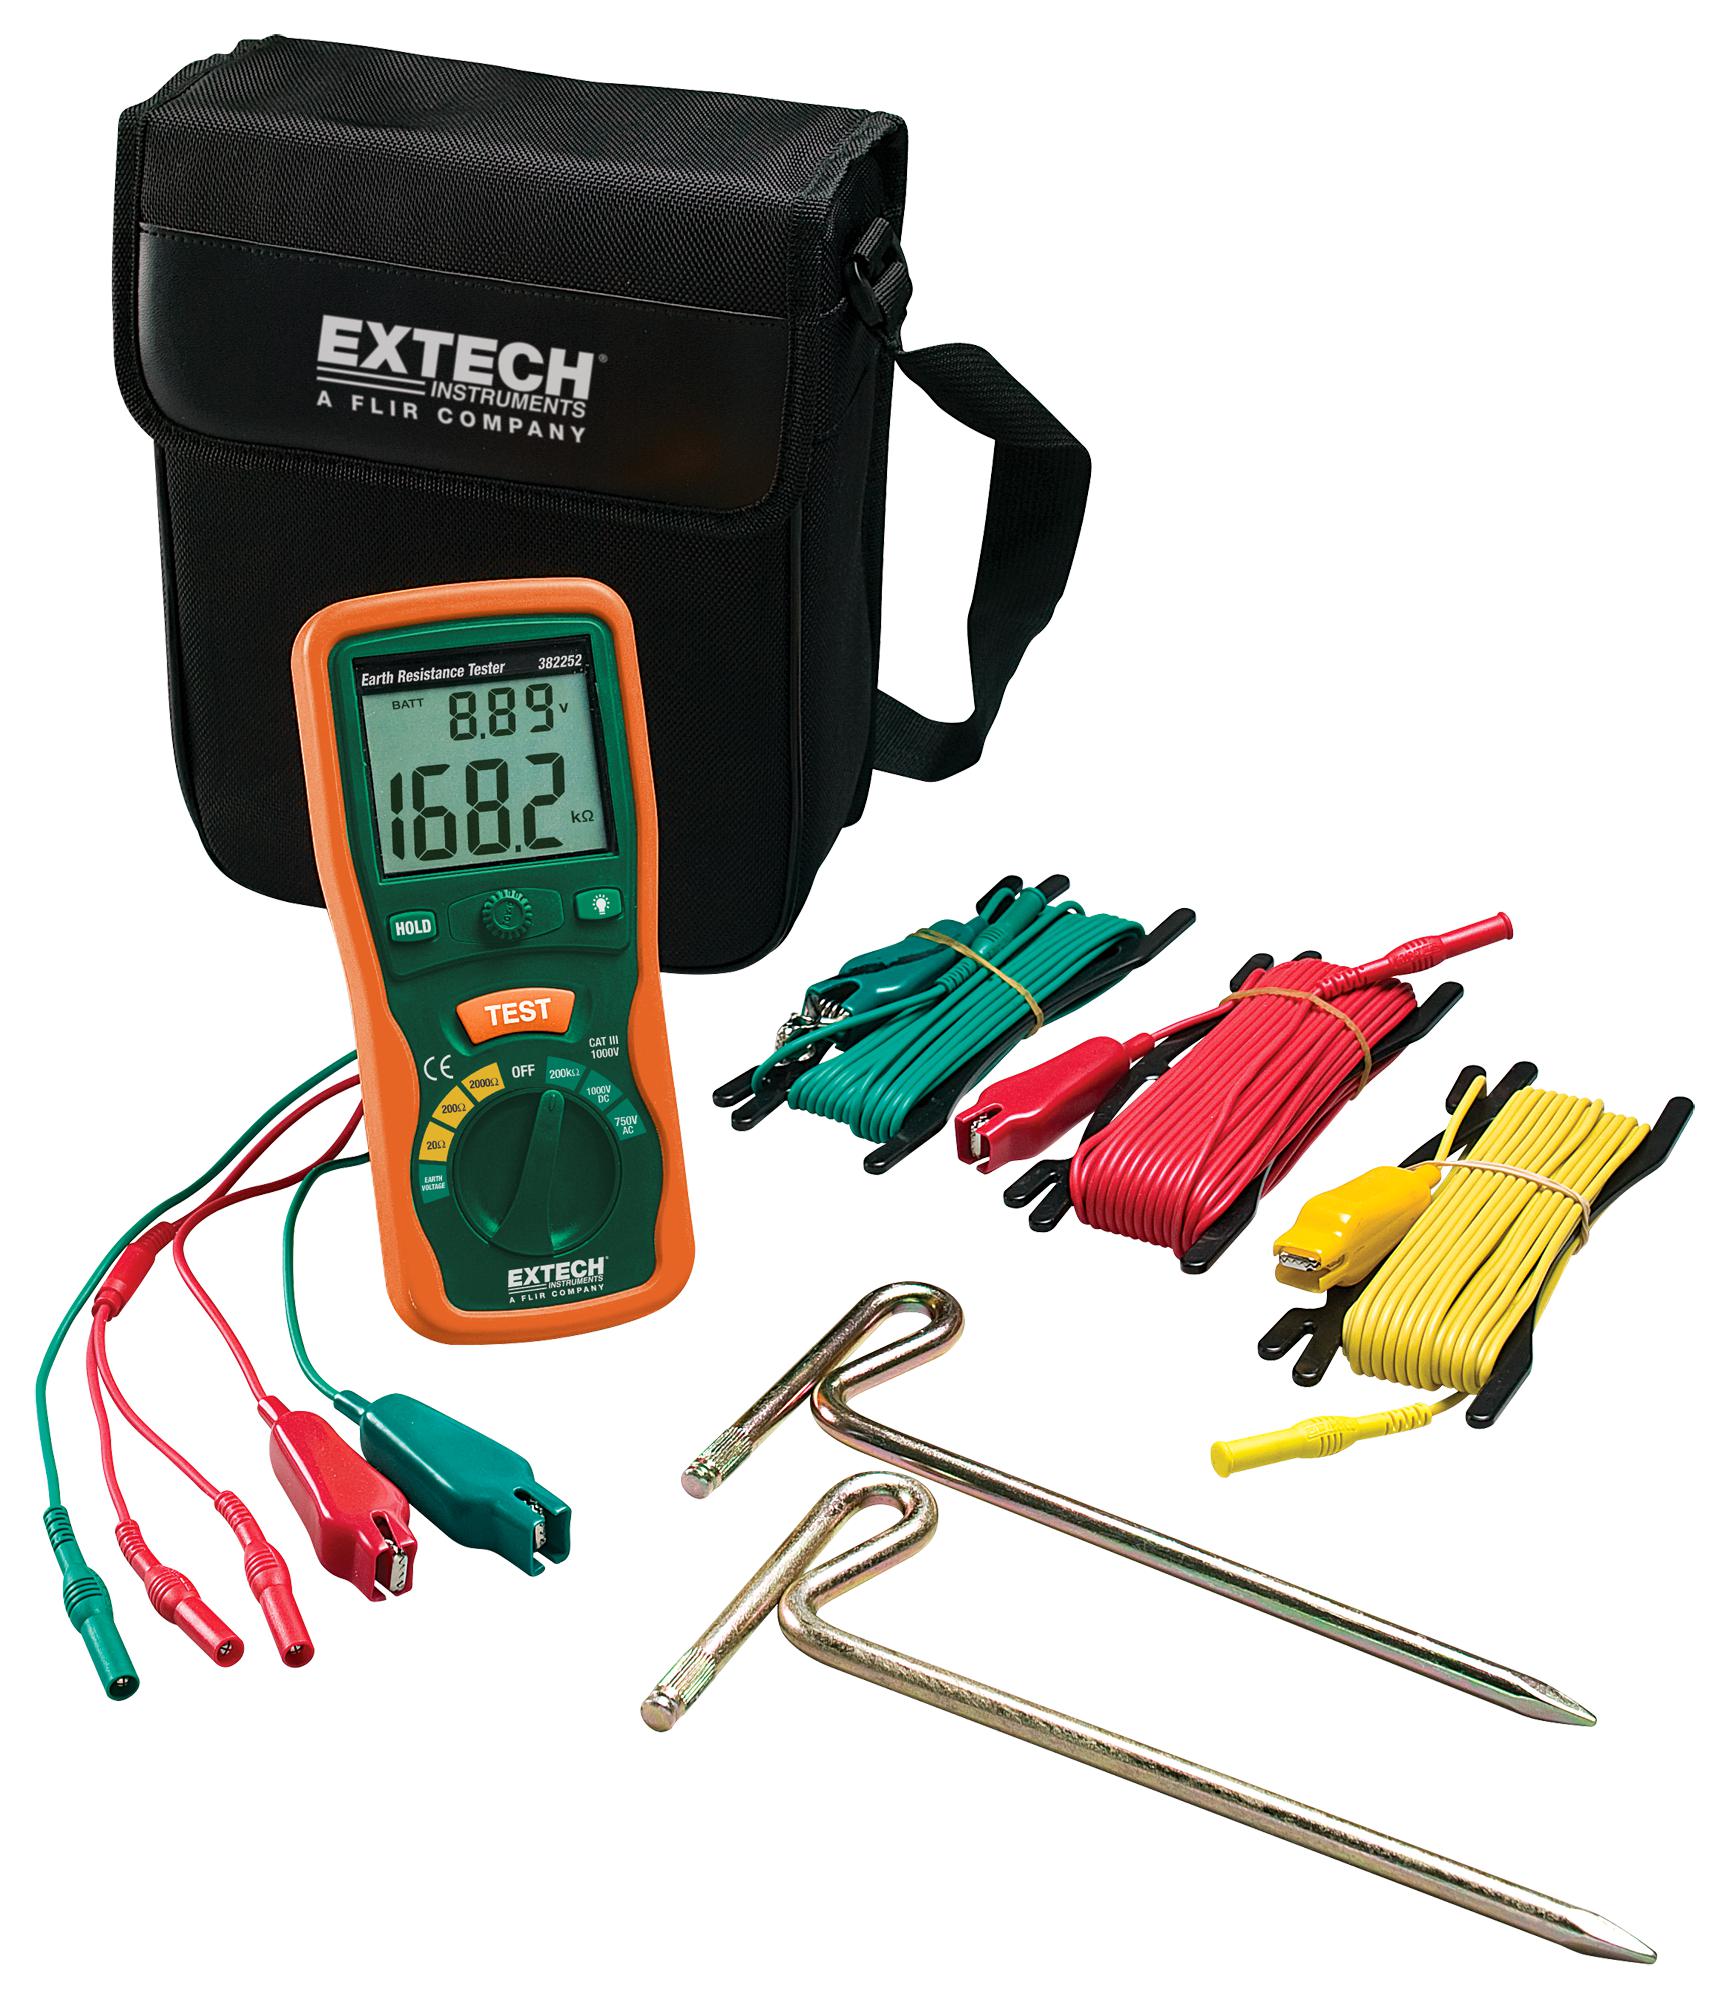 382252 EARTH GROUND RESISTANCE TESTER KIT EXTECH INSTRUMENTS